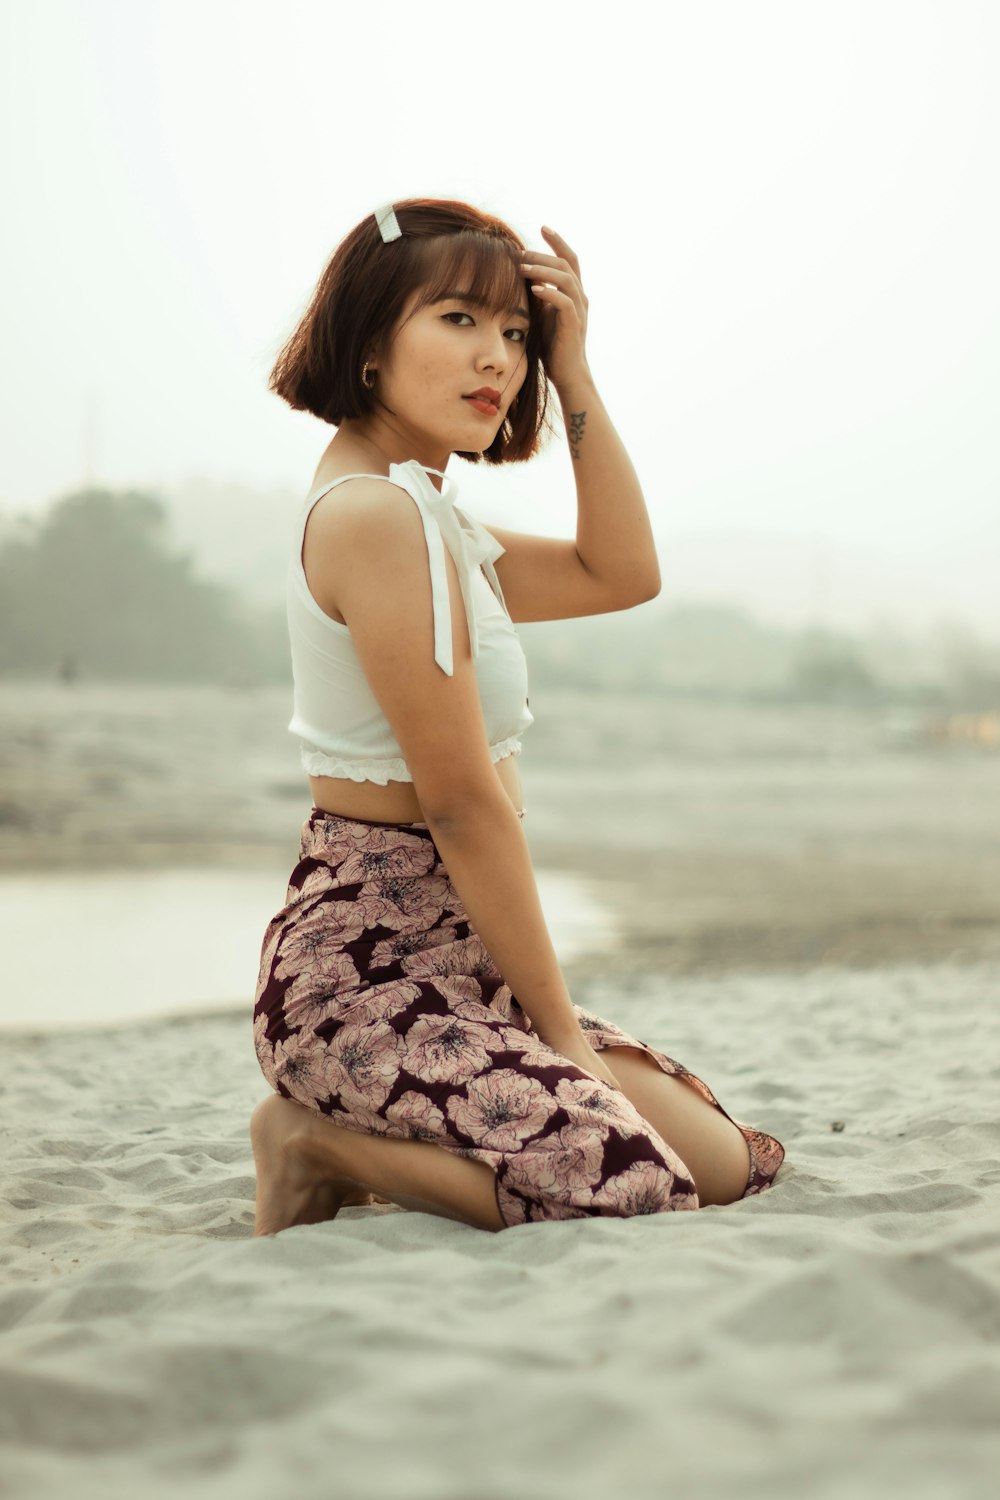 woman in white tank top and purple and white floral skirt sitting on beach shore during